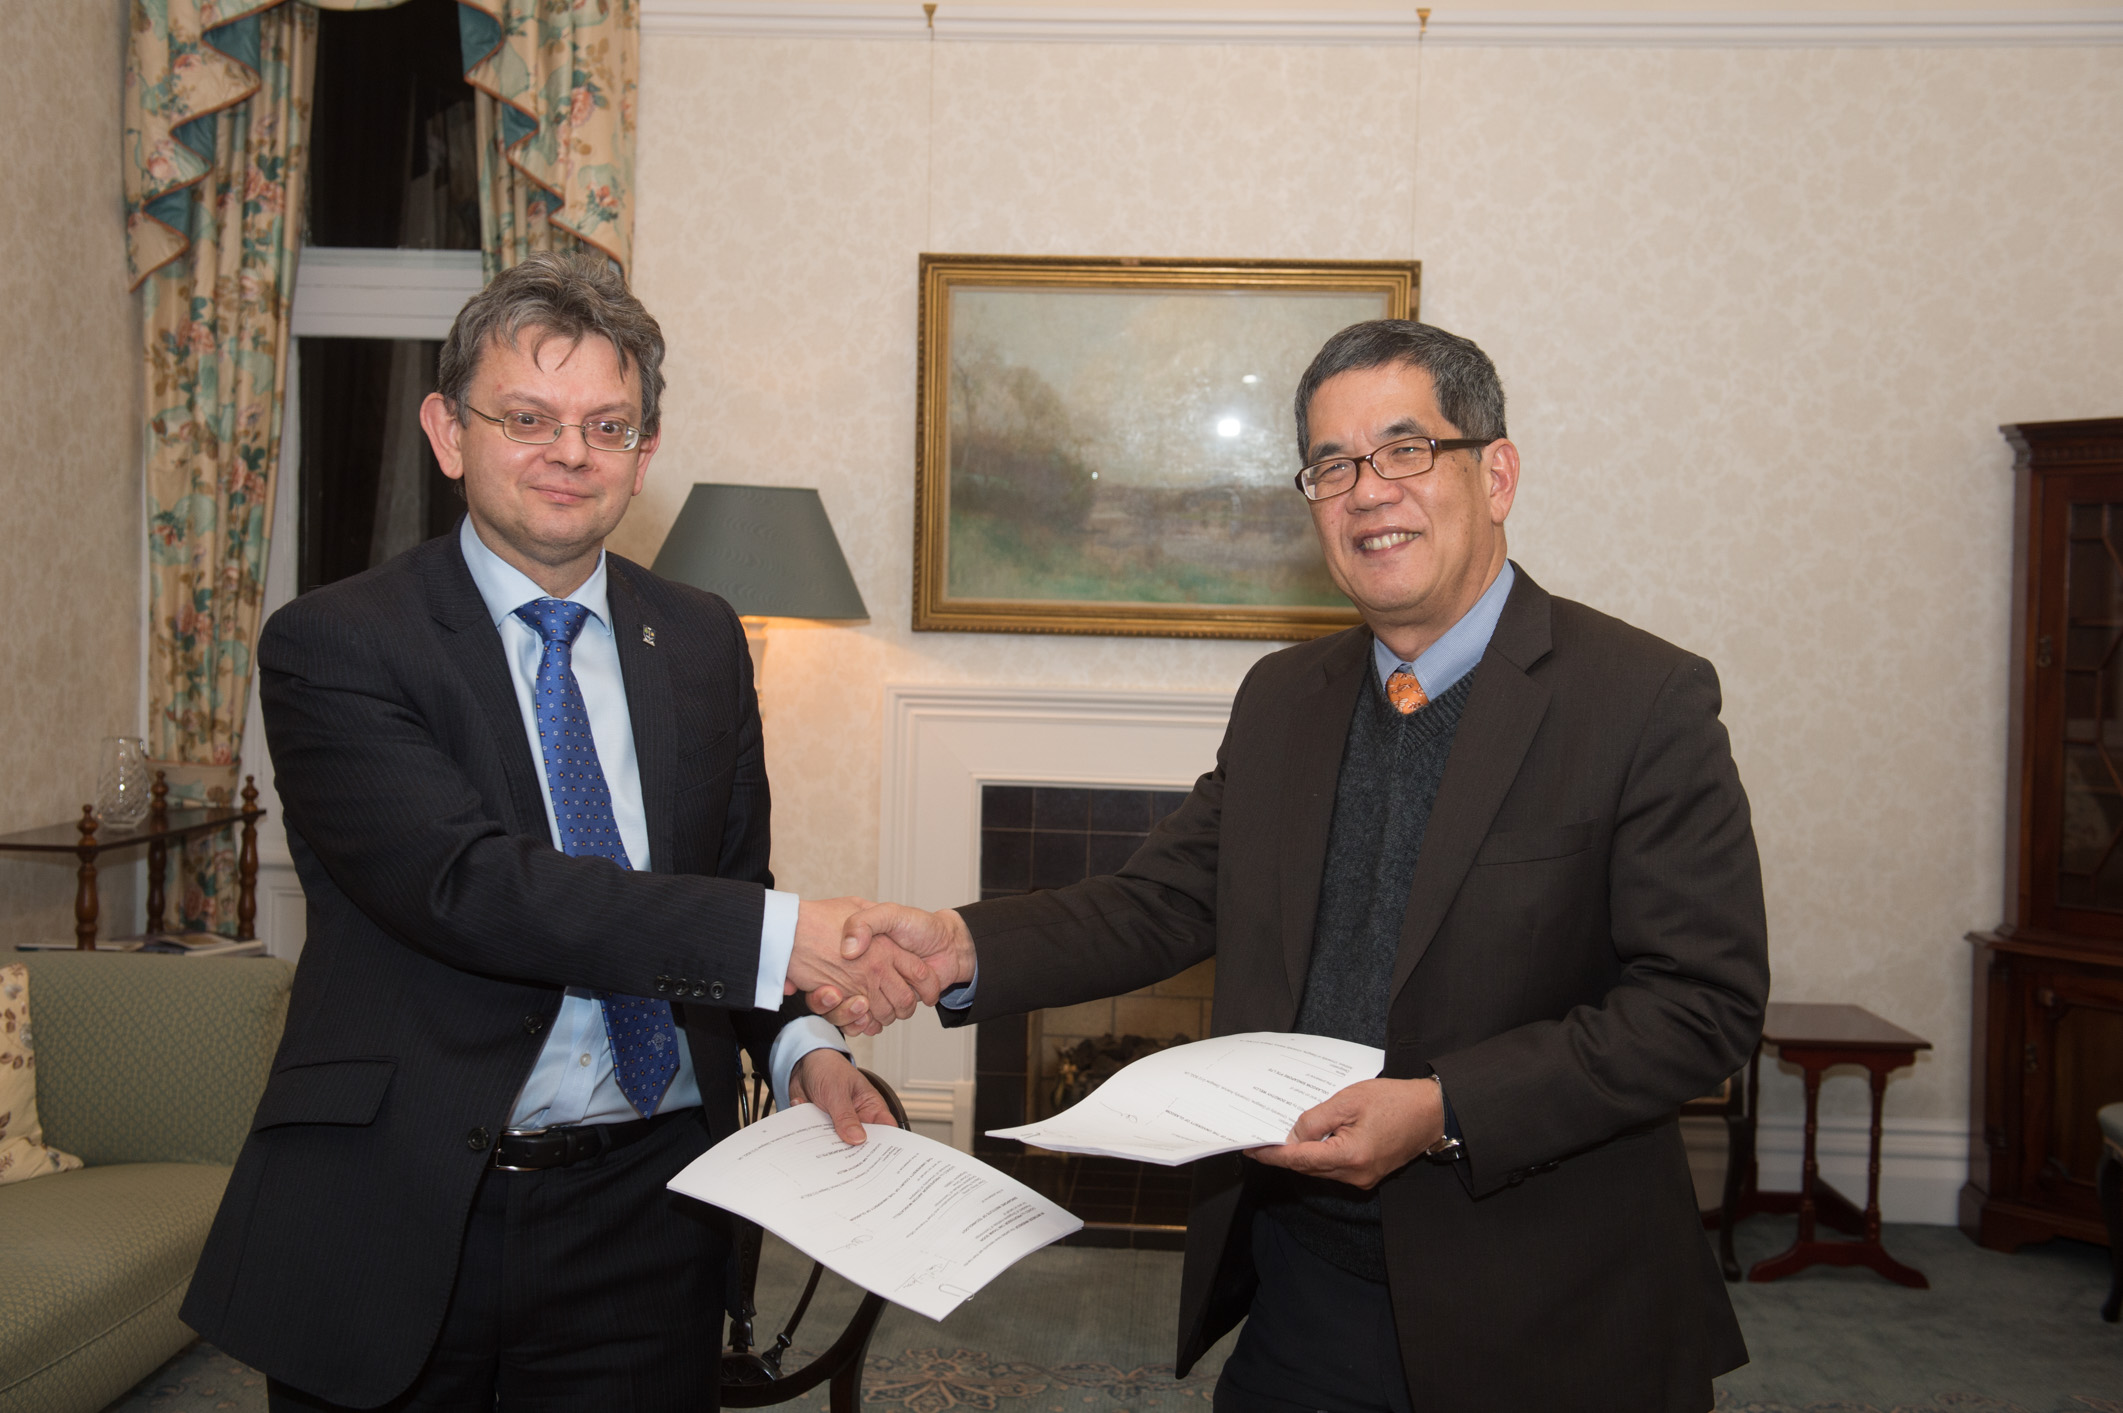 Signing of the joint degree programme between Prof Anton Muscatelli, Principal and Vice-Chancellor of the University of Glasgow, and Prof Tan Thiam Soon, President, SIT.